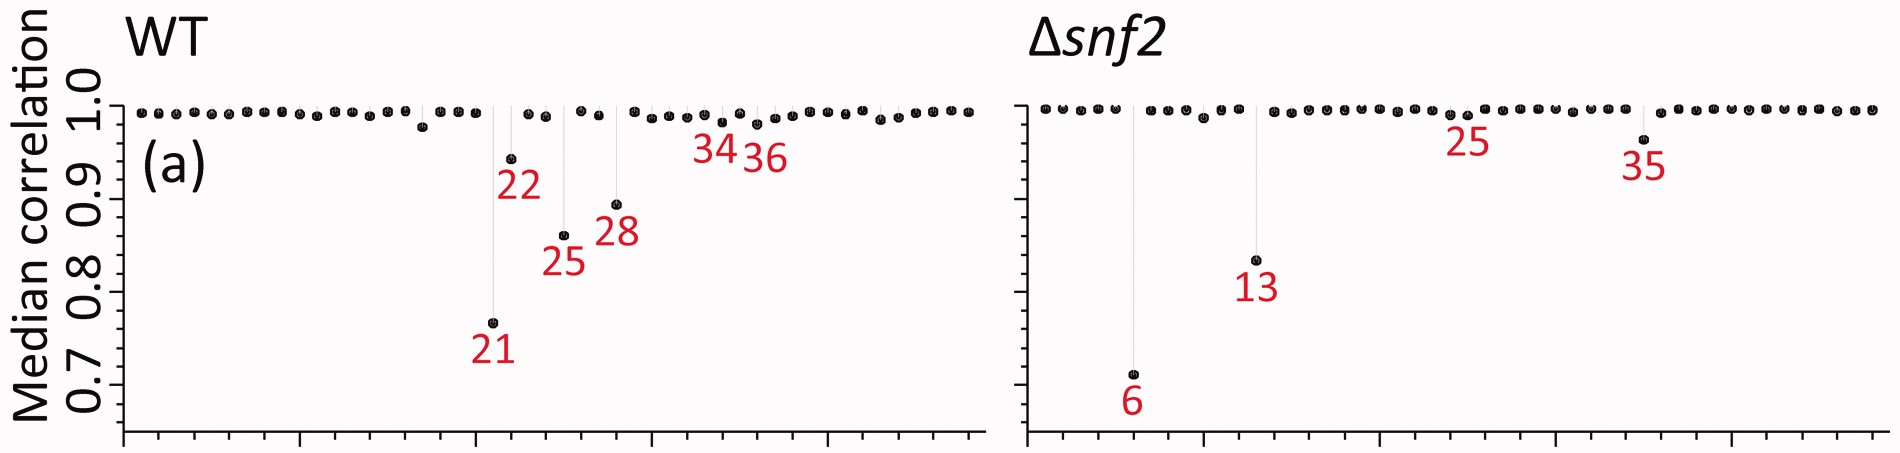 Figure 2(a) from [@Gierlinski2015]. Identifying bad RNA-seq replicates in the WT (left) and Δsnf2 (right) data. The top three panels (a–c) show individual criteria for identifying ‘bad’ replicates which are combined into a quality score (d) in order to identify ‘bad’ replicates in each condition. The identified ‘bad’ replicates are shown as numbered points in each panel. The individual criteria are (a) median correlation coefficient, ri∼⁠, for each replicate i against all other replicates, (b) outlier fraction, fi⁠, calculated as a fraction of genes where the given replicate is more than five-trimmed standard deviations from the trimmed mean and (c) median reduced χ2 of pileup depth, χ∼2i⁠, as a measure of the non-uniformity of read distribution within genes (see also Fig. 3)